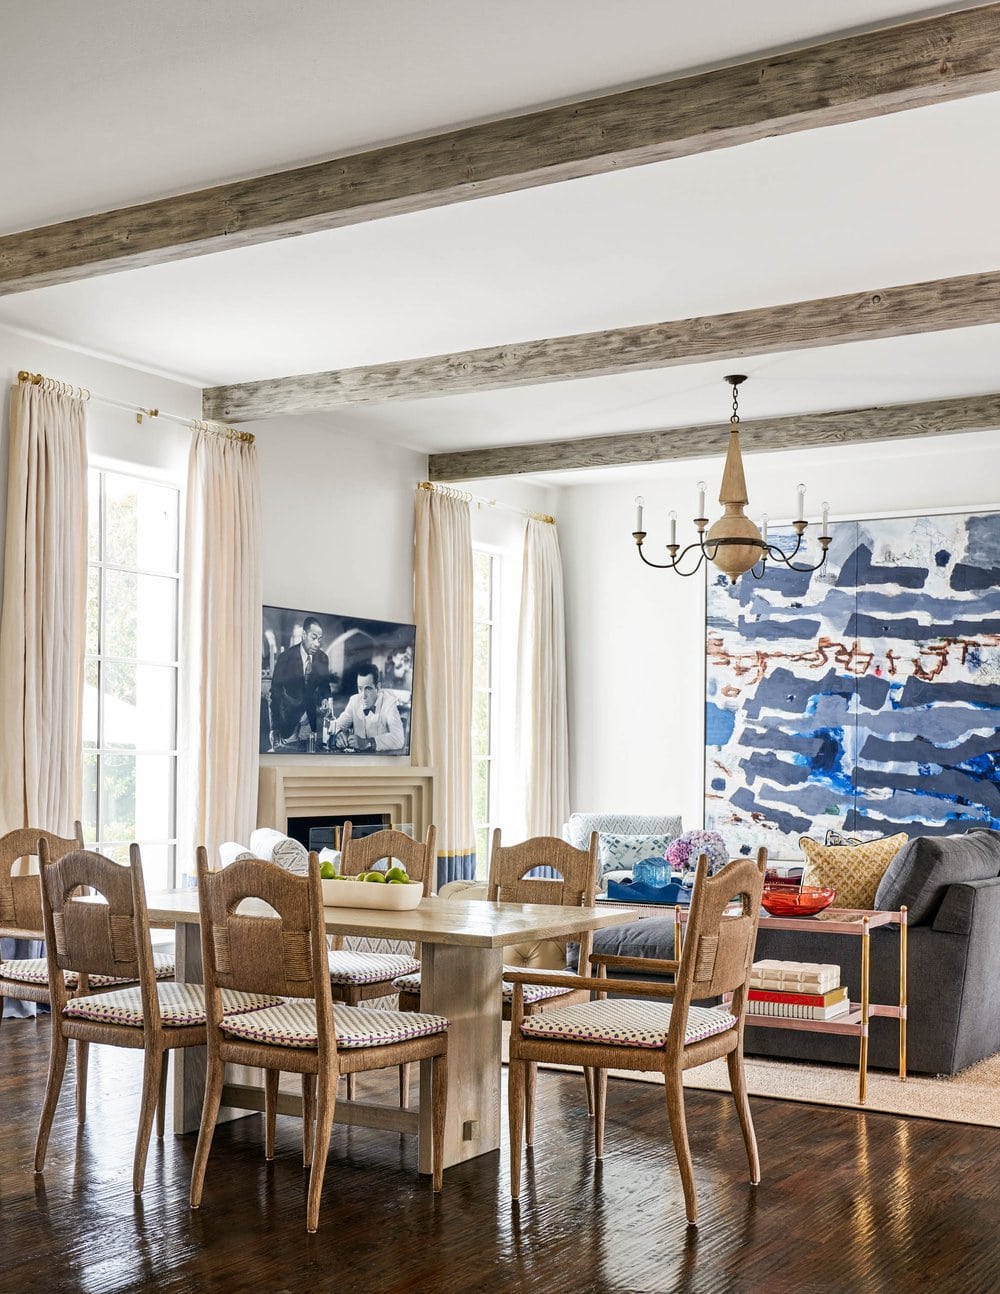 Delightful Dallas home from Designer Mary Beth Williams | Photography Nathan Schroder. Love the breakfast room with the wood beams and the keeping room with the amazing abstract art